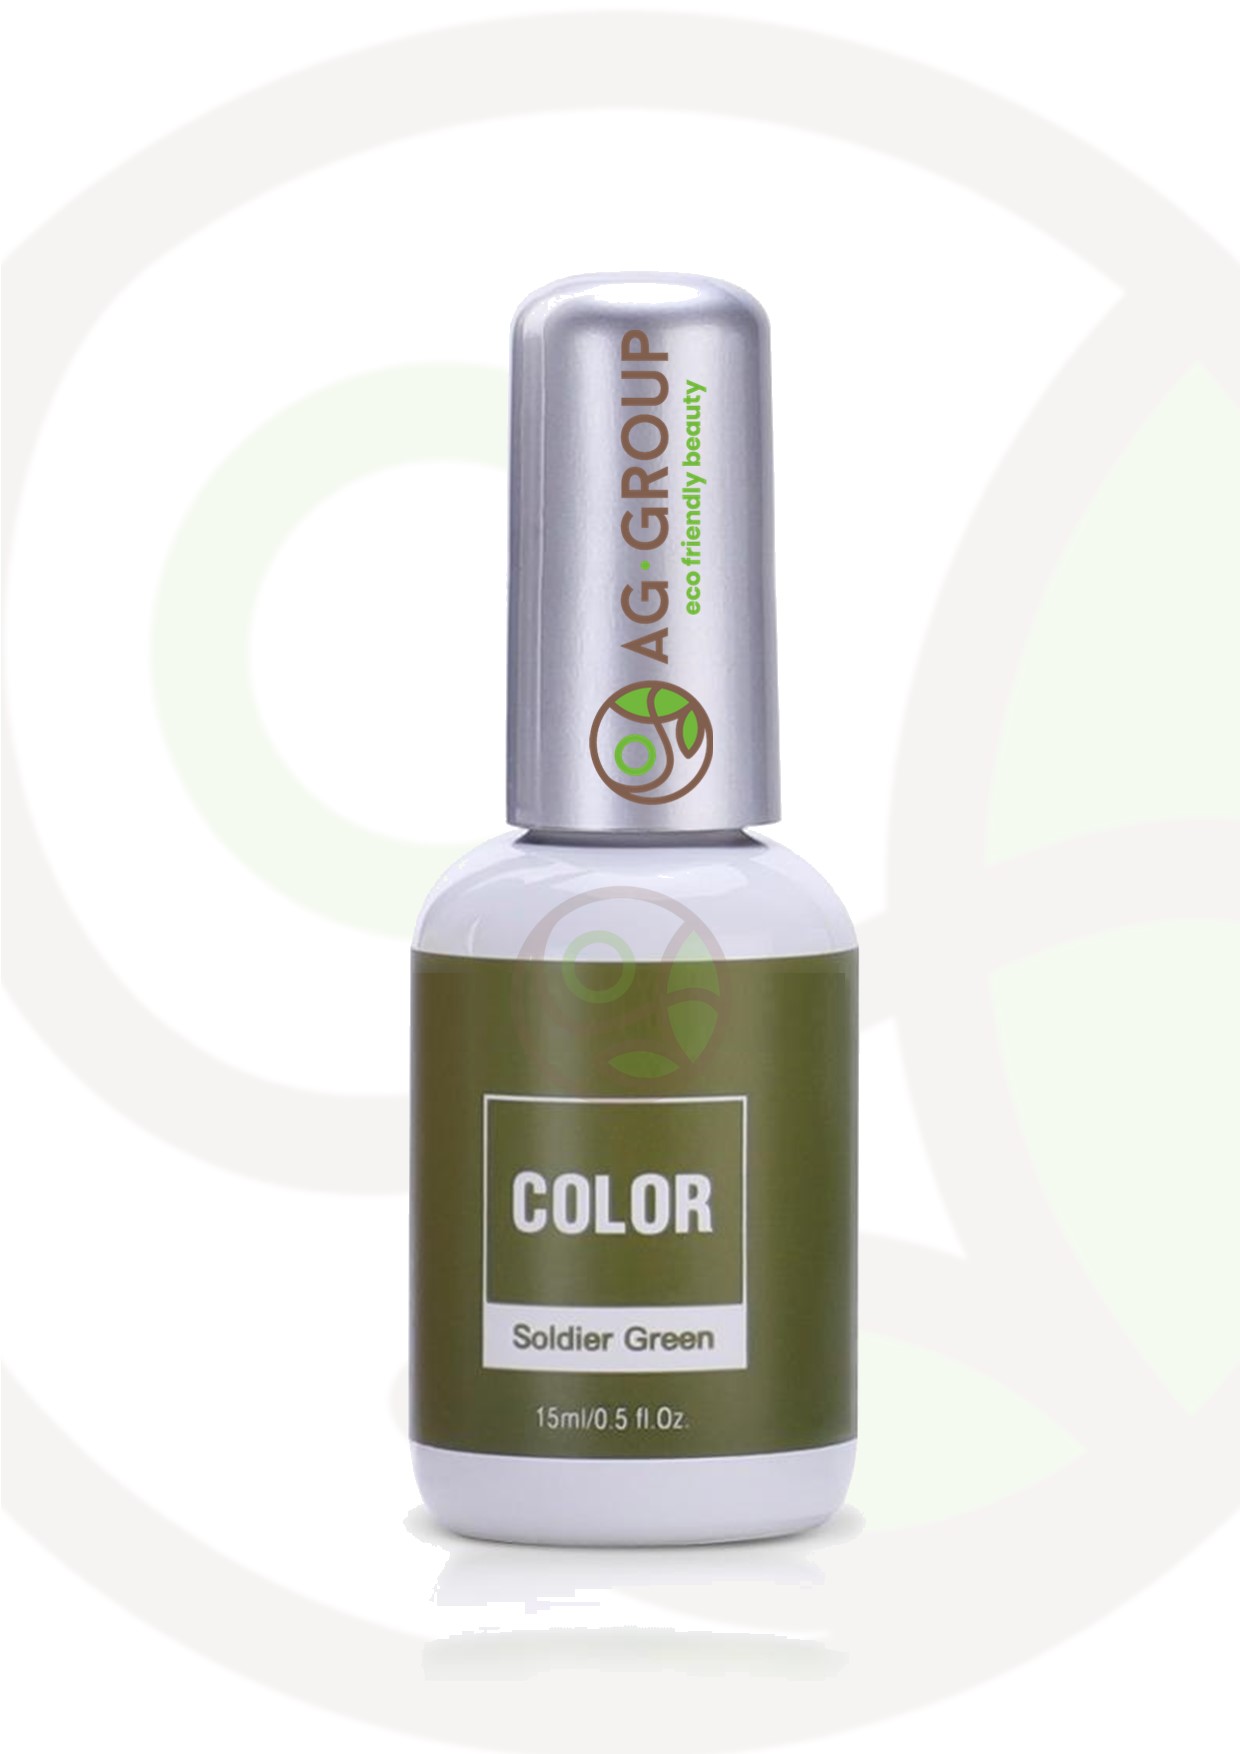 Featured image for “Gel polish soak -off led/uv-soldier green”